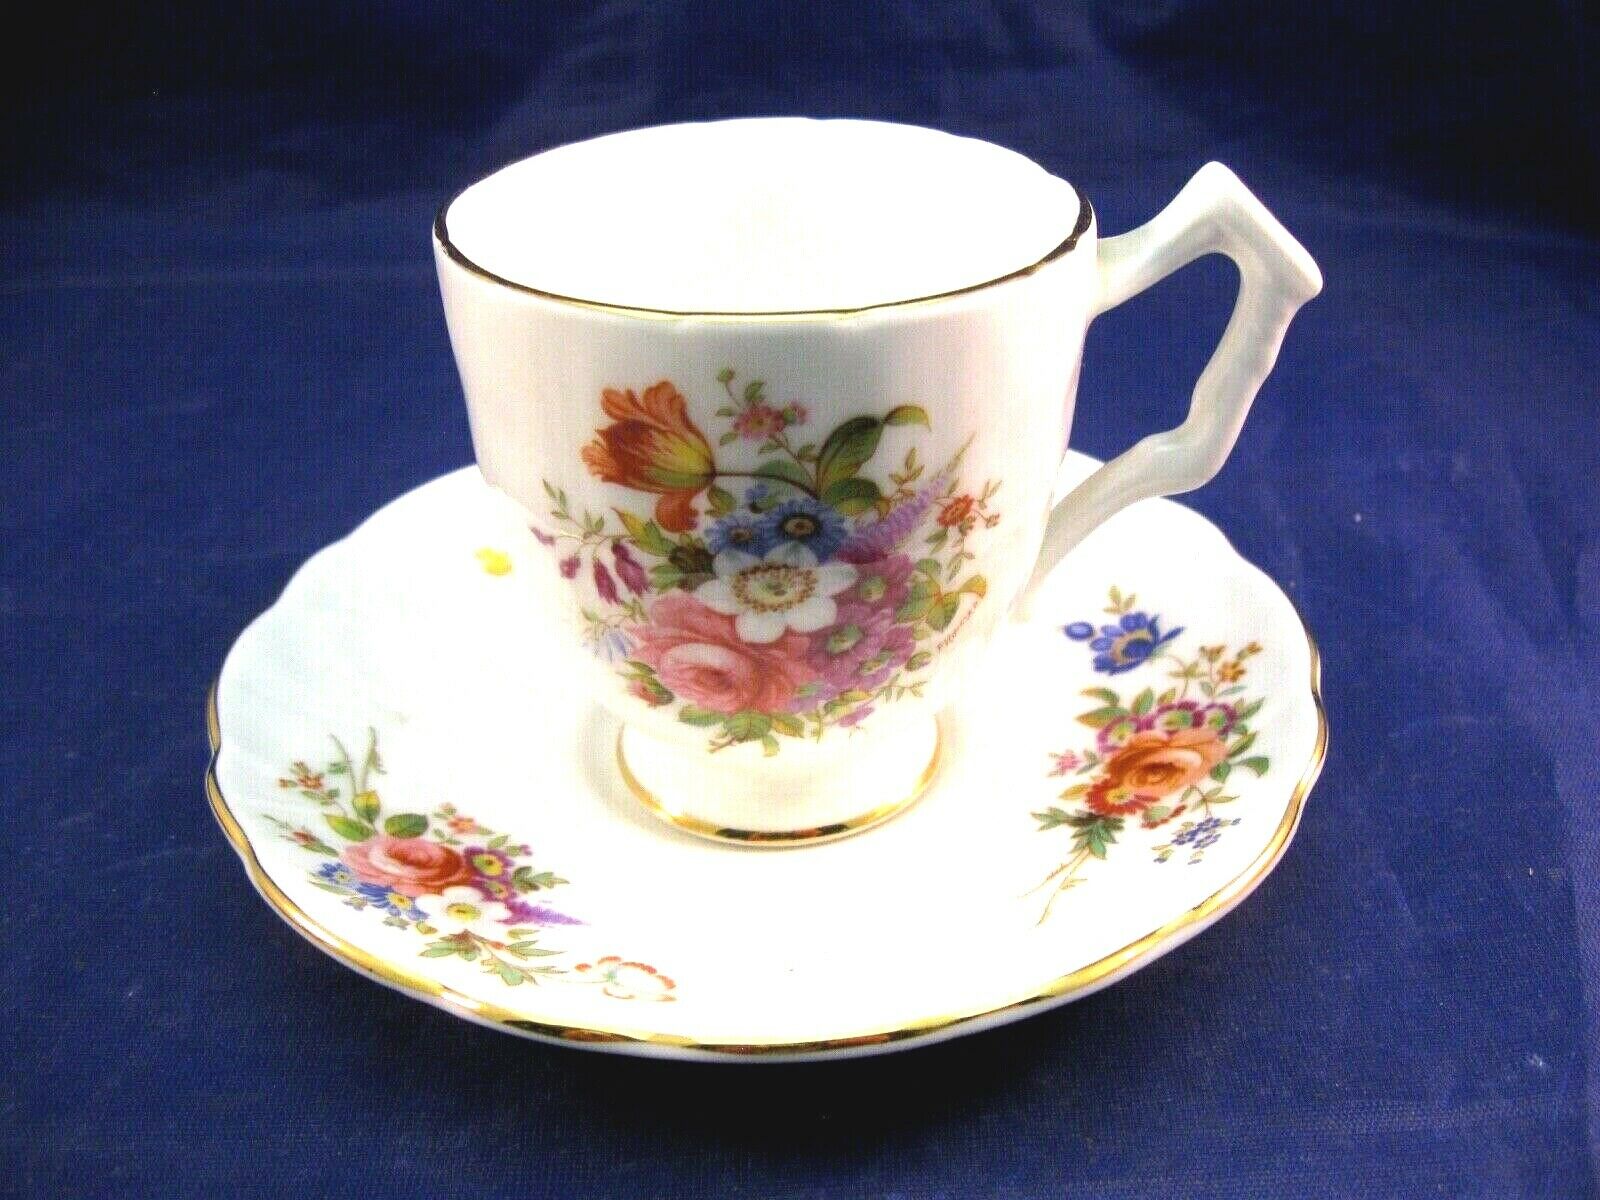 Small Hammersley Tea Cup & Saucer - Mixed Bouquet Of Flowers - Fine English Bone